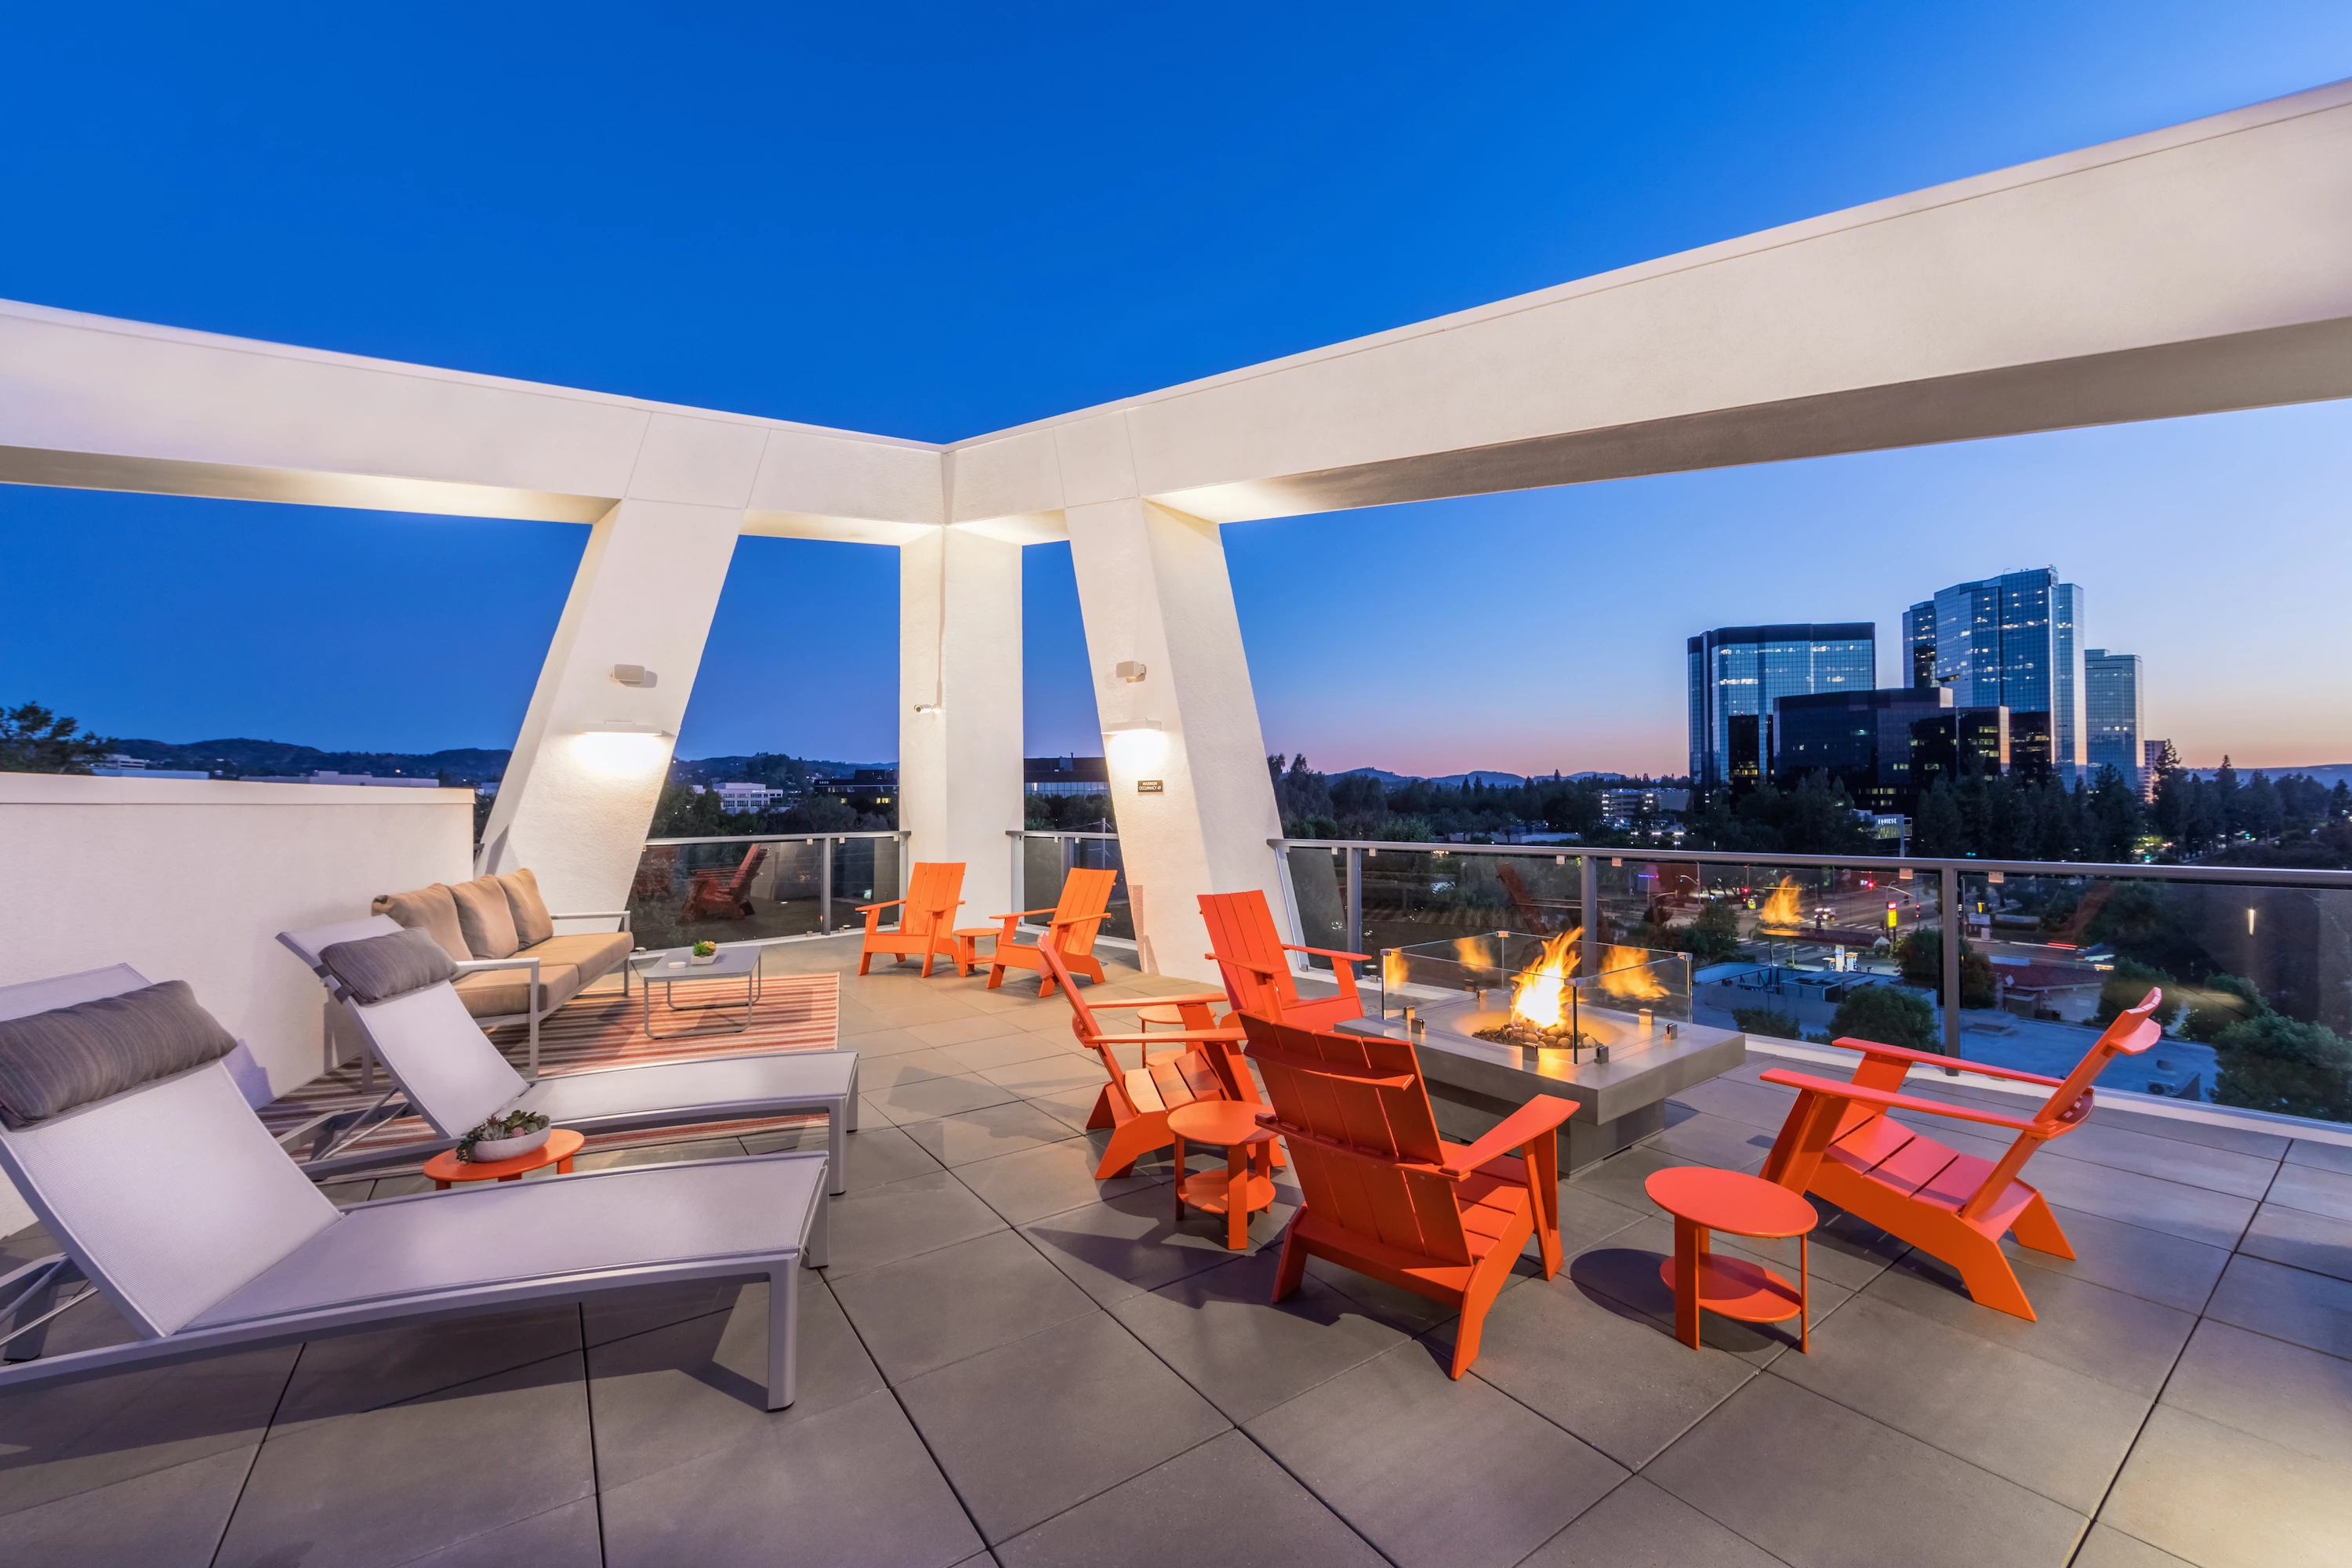 1251-10-amenity-tower-rooftop-lounge-fire-pit-night-at-vela-on-ox-apartments-in-woodl.jpg